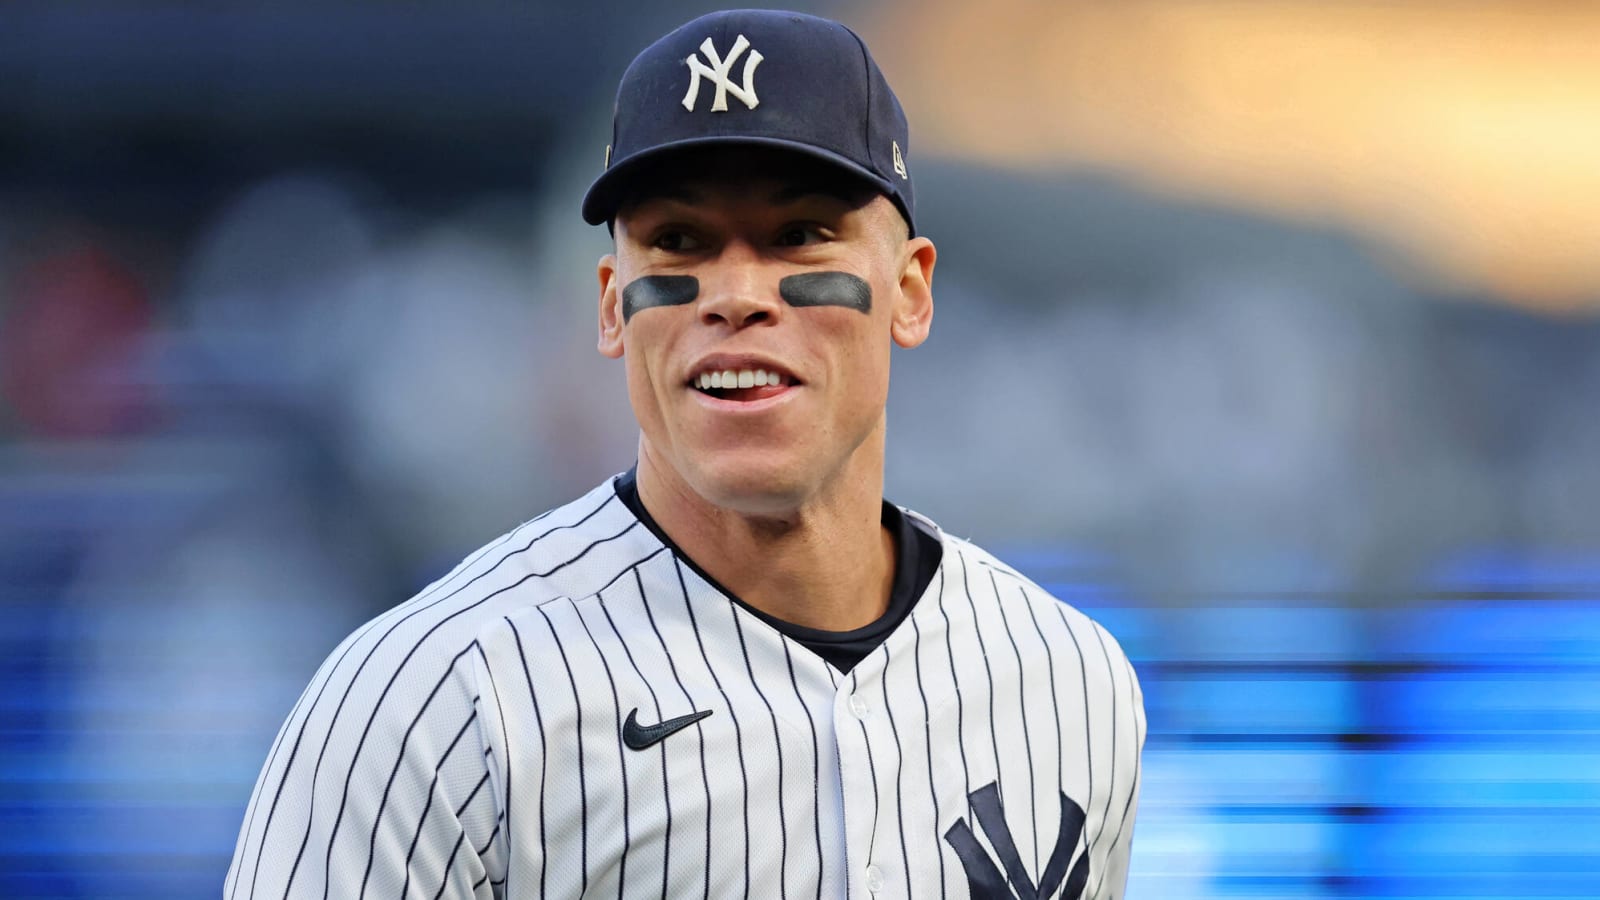 Aaron Judge on 2022 MVP: 'You never truly think it's going to happen'